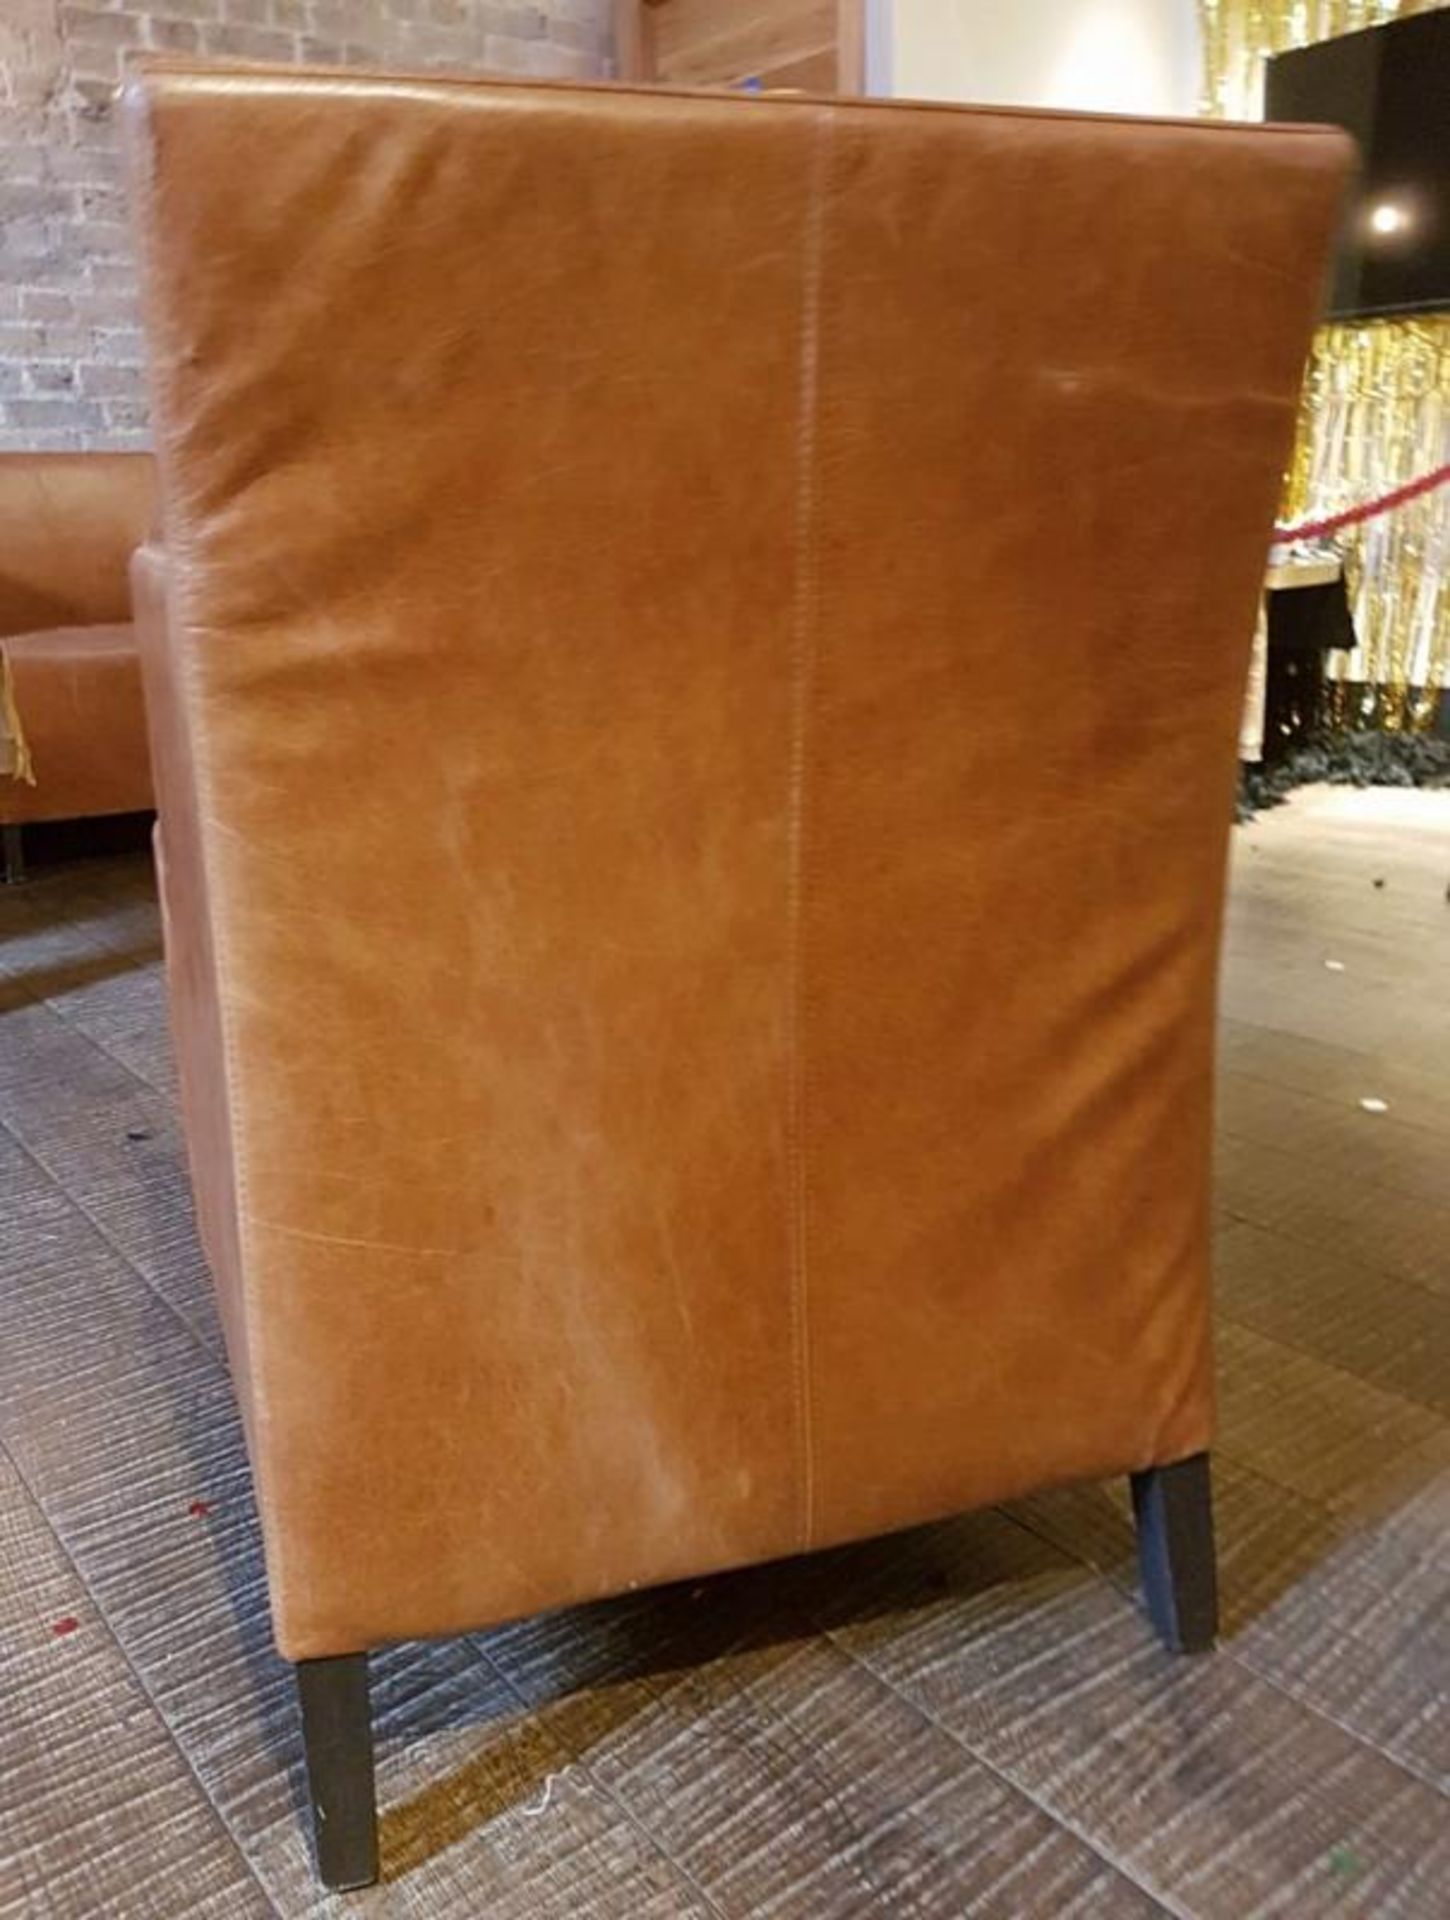 1 x Large Armchair Upholstered In Tan Leather - Recently Removed From A City Centre Steakhouse Resta - Image 3 of 5